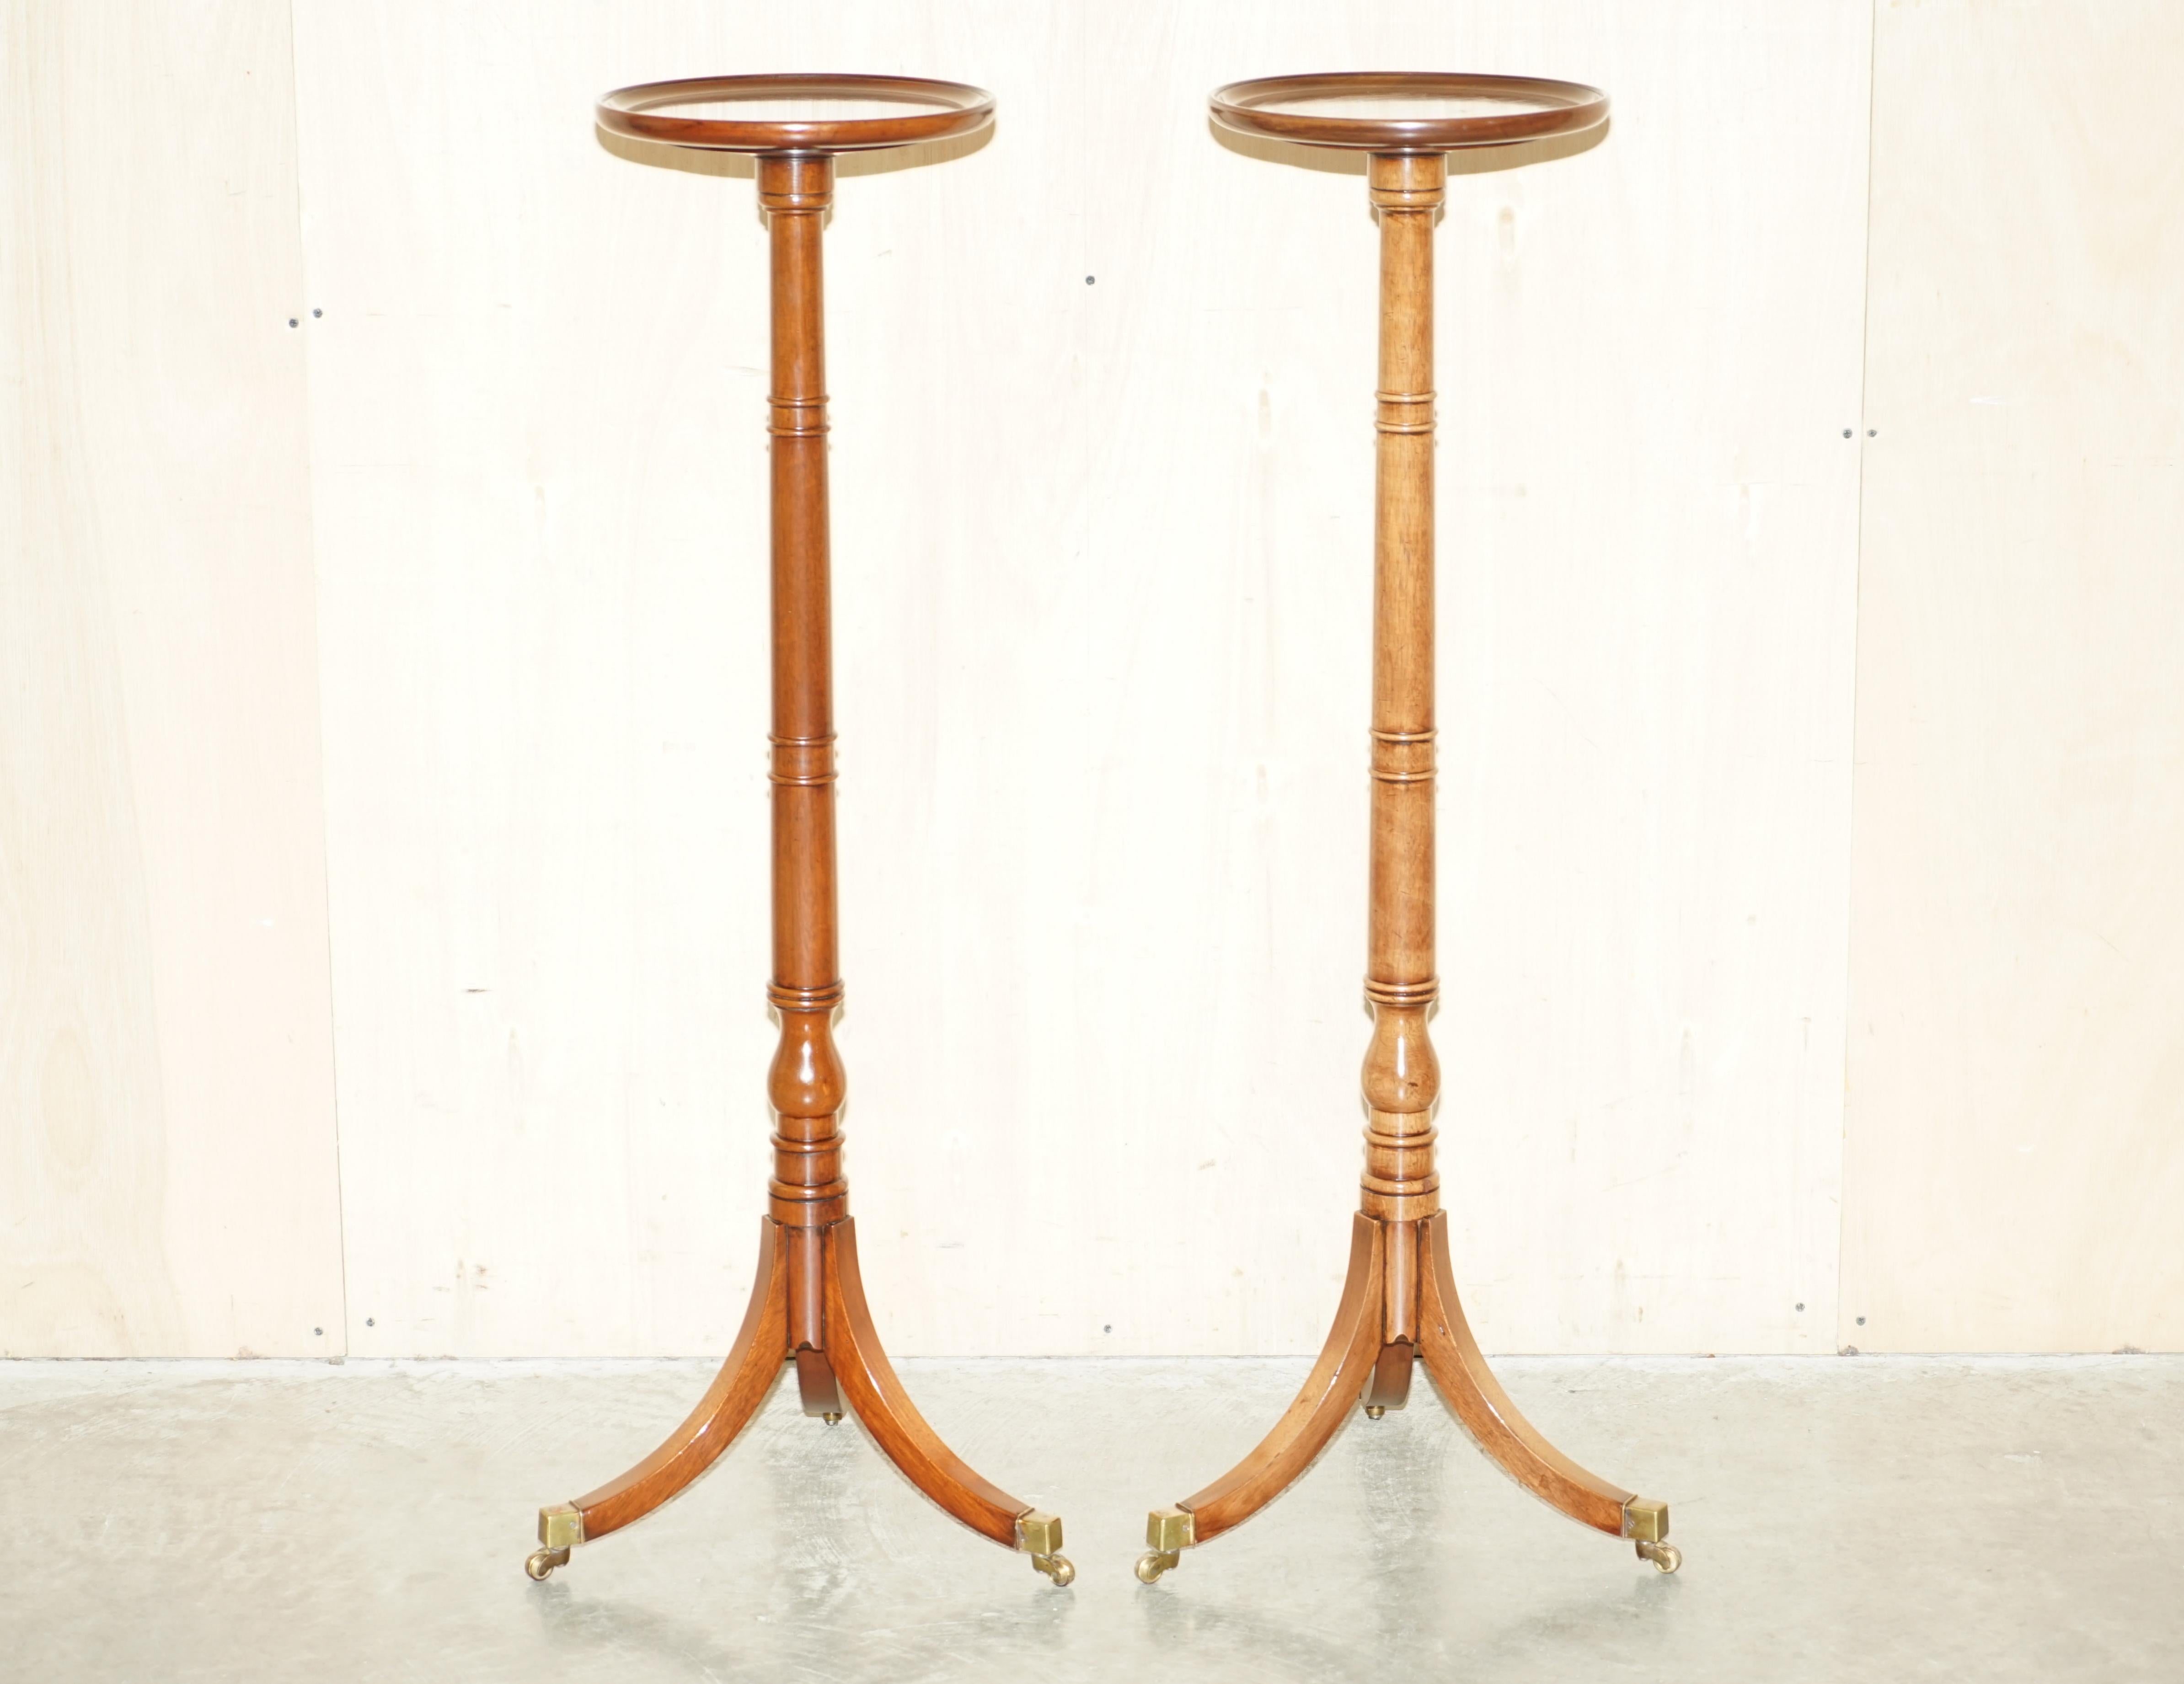 We are delighted to offer for sale this stunning pair of original Victorian hand carved mahogany Jardinière plant stands with Military Campaign style brass castors

A very decorative and good looking piece, its solid mahogany, designed to seat a